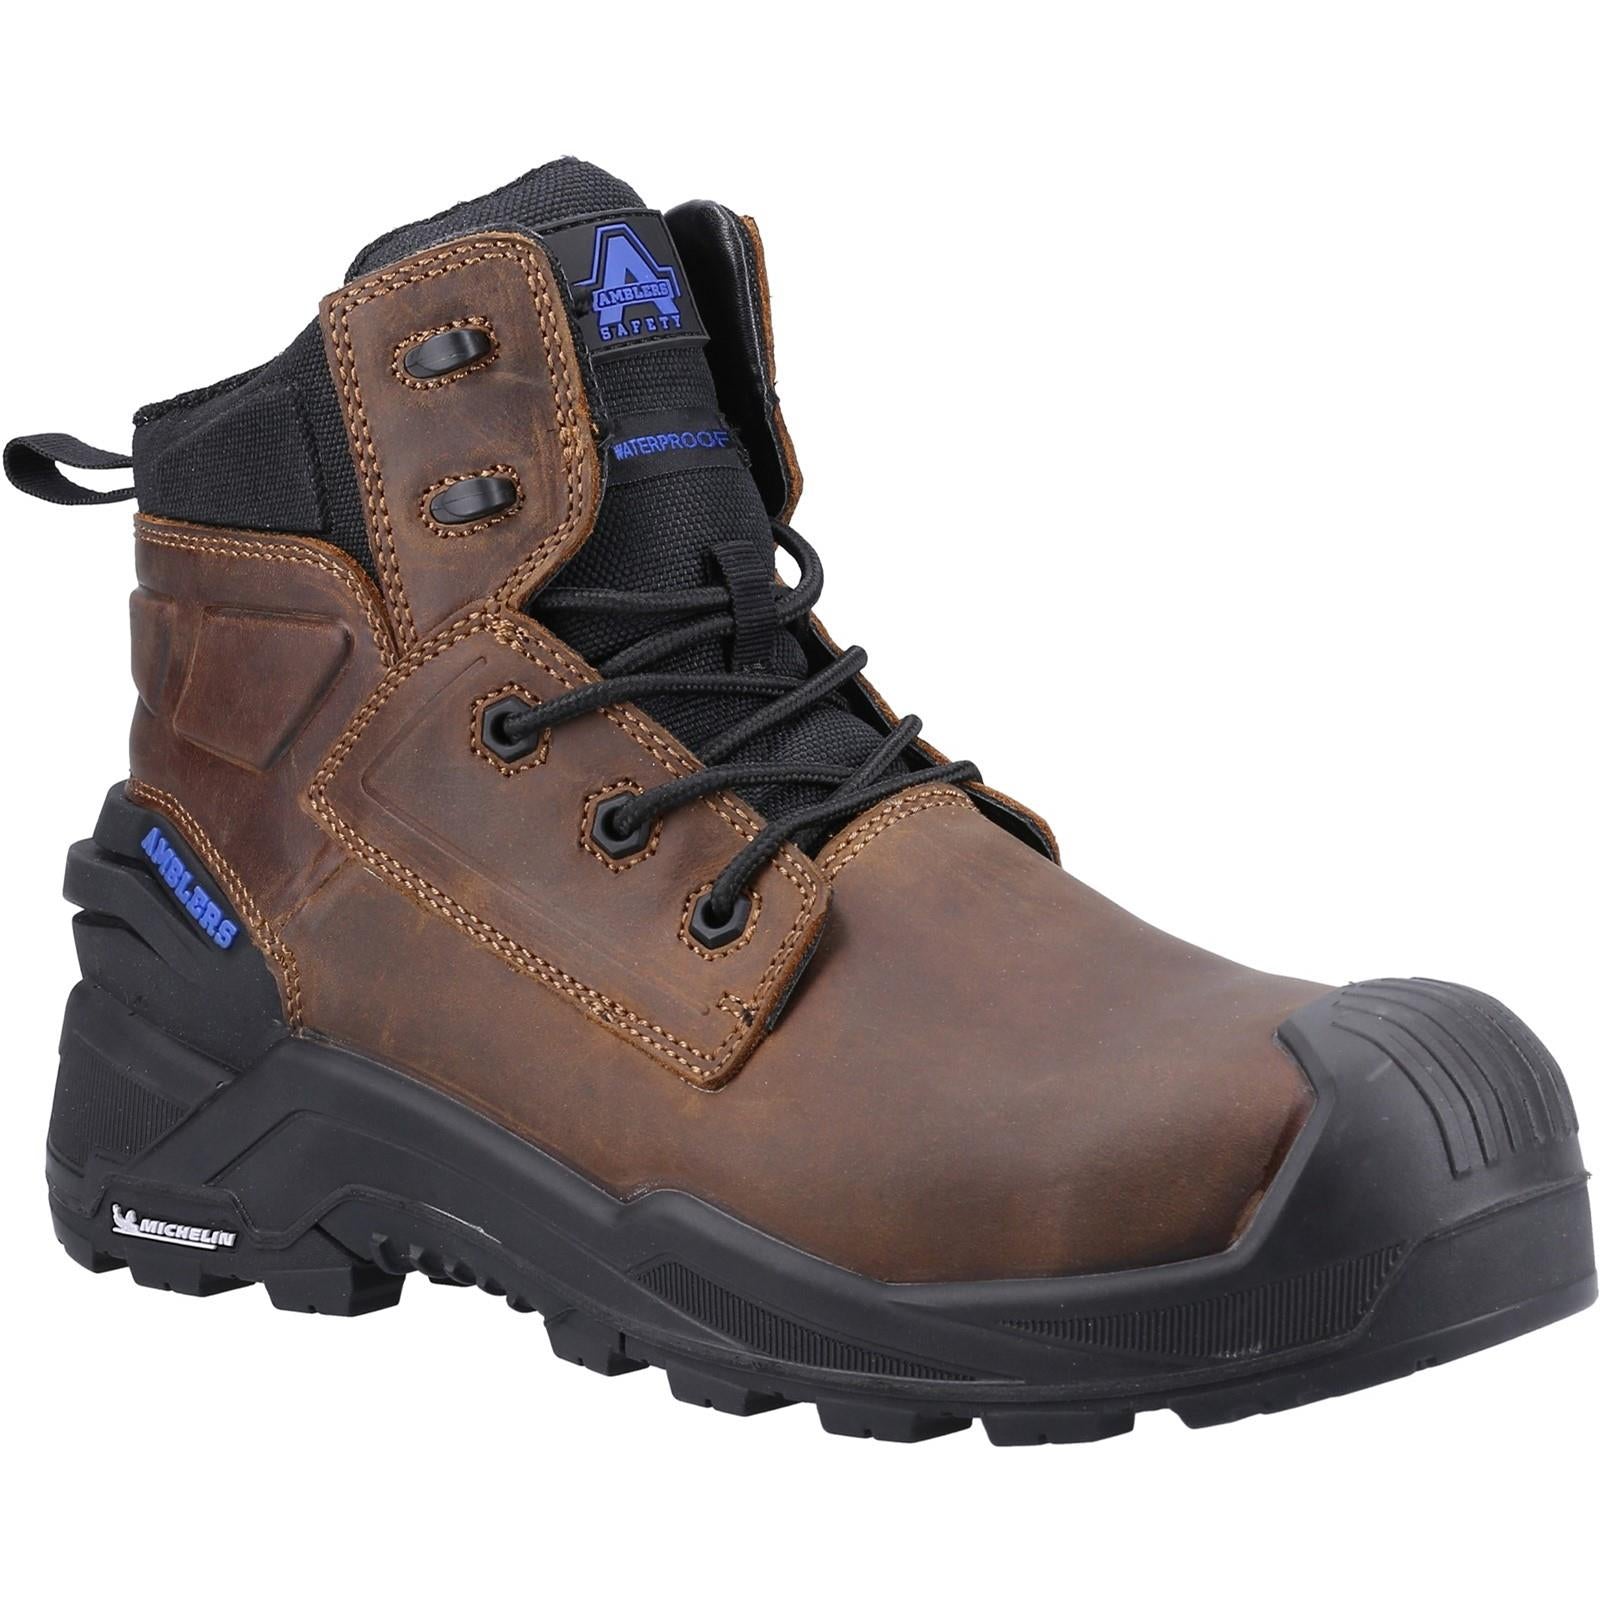 Amblers Crusader S3 brown composite toe waterproof work safety boots #AS980C